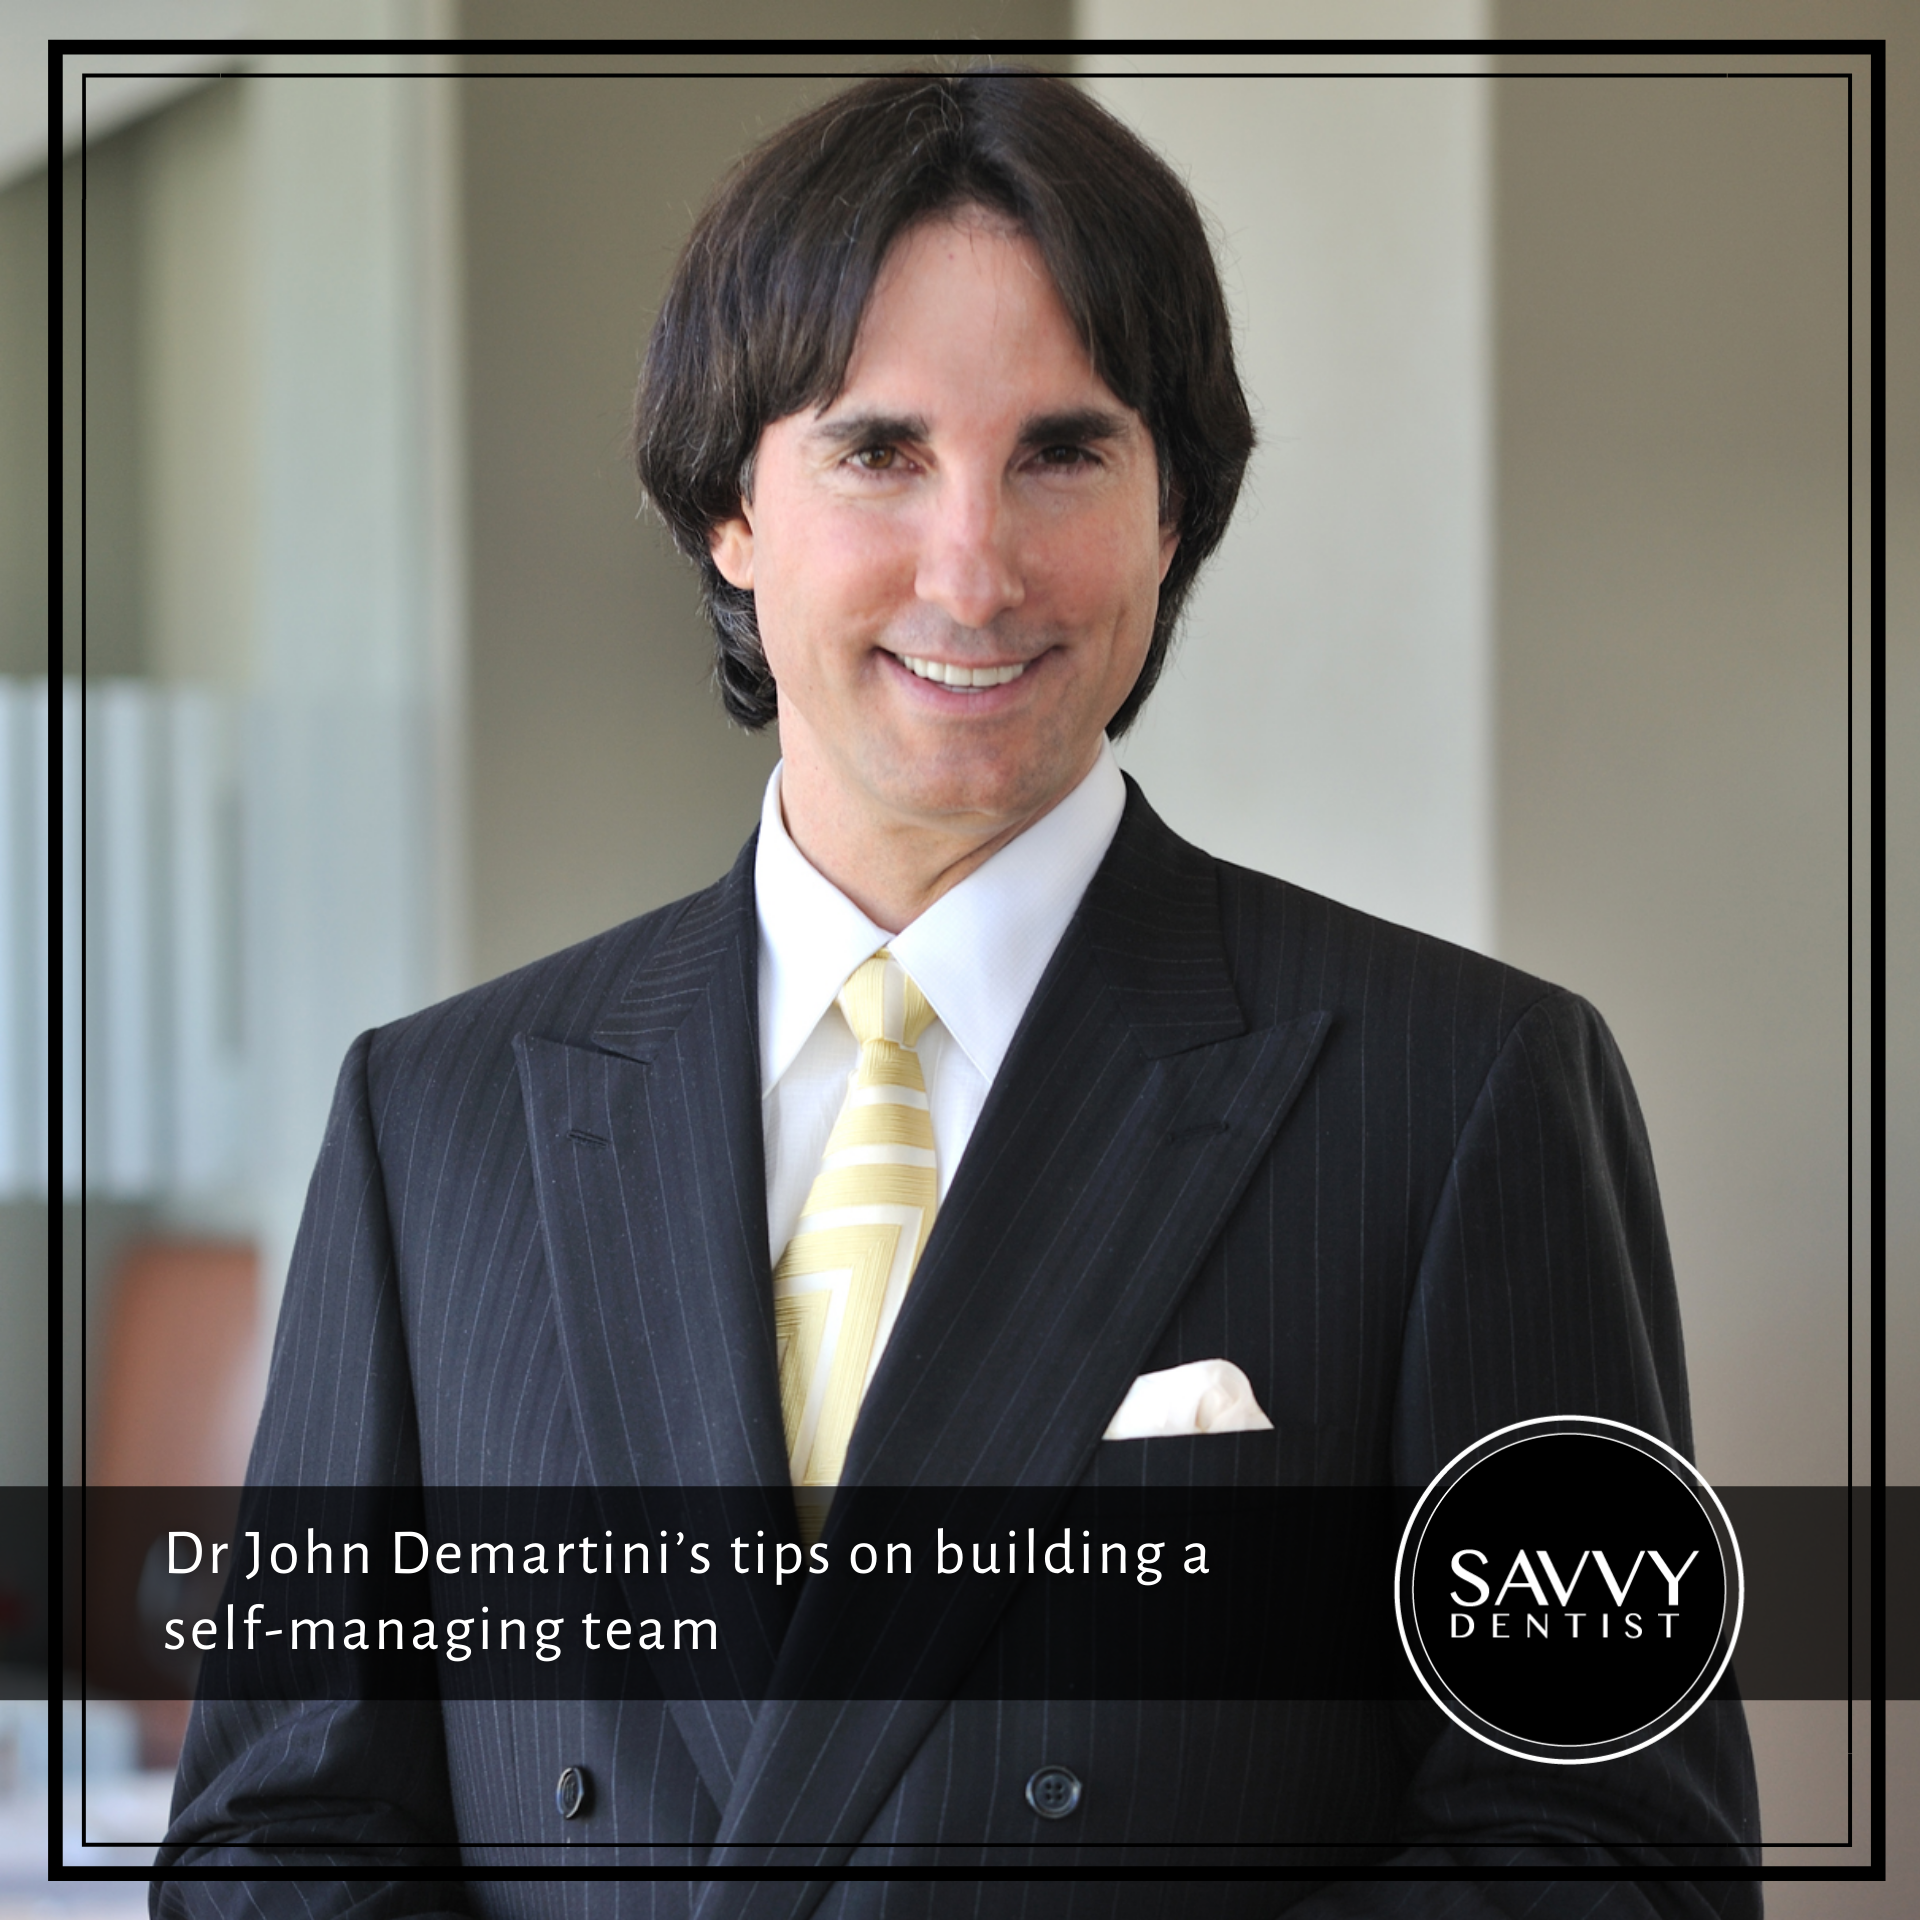 Dr John Demartini’s tips on building a self-managing team